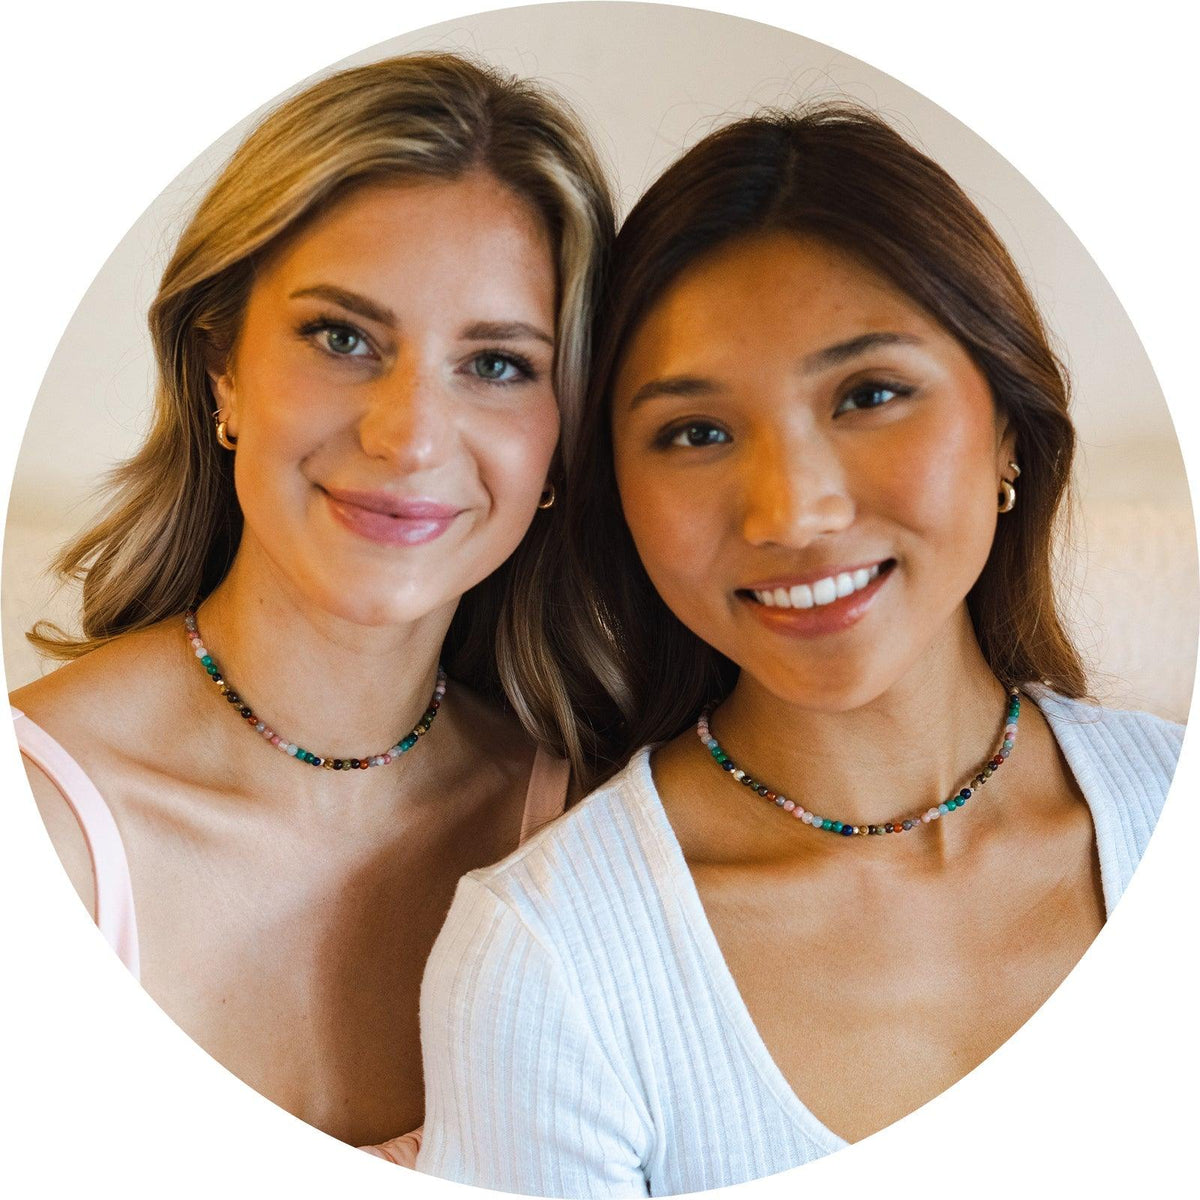 Two girls wearing matching healing necklaces. The necklace is a 6mm multicolor stone healing necklace